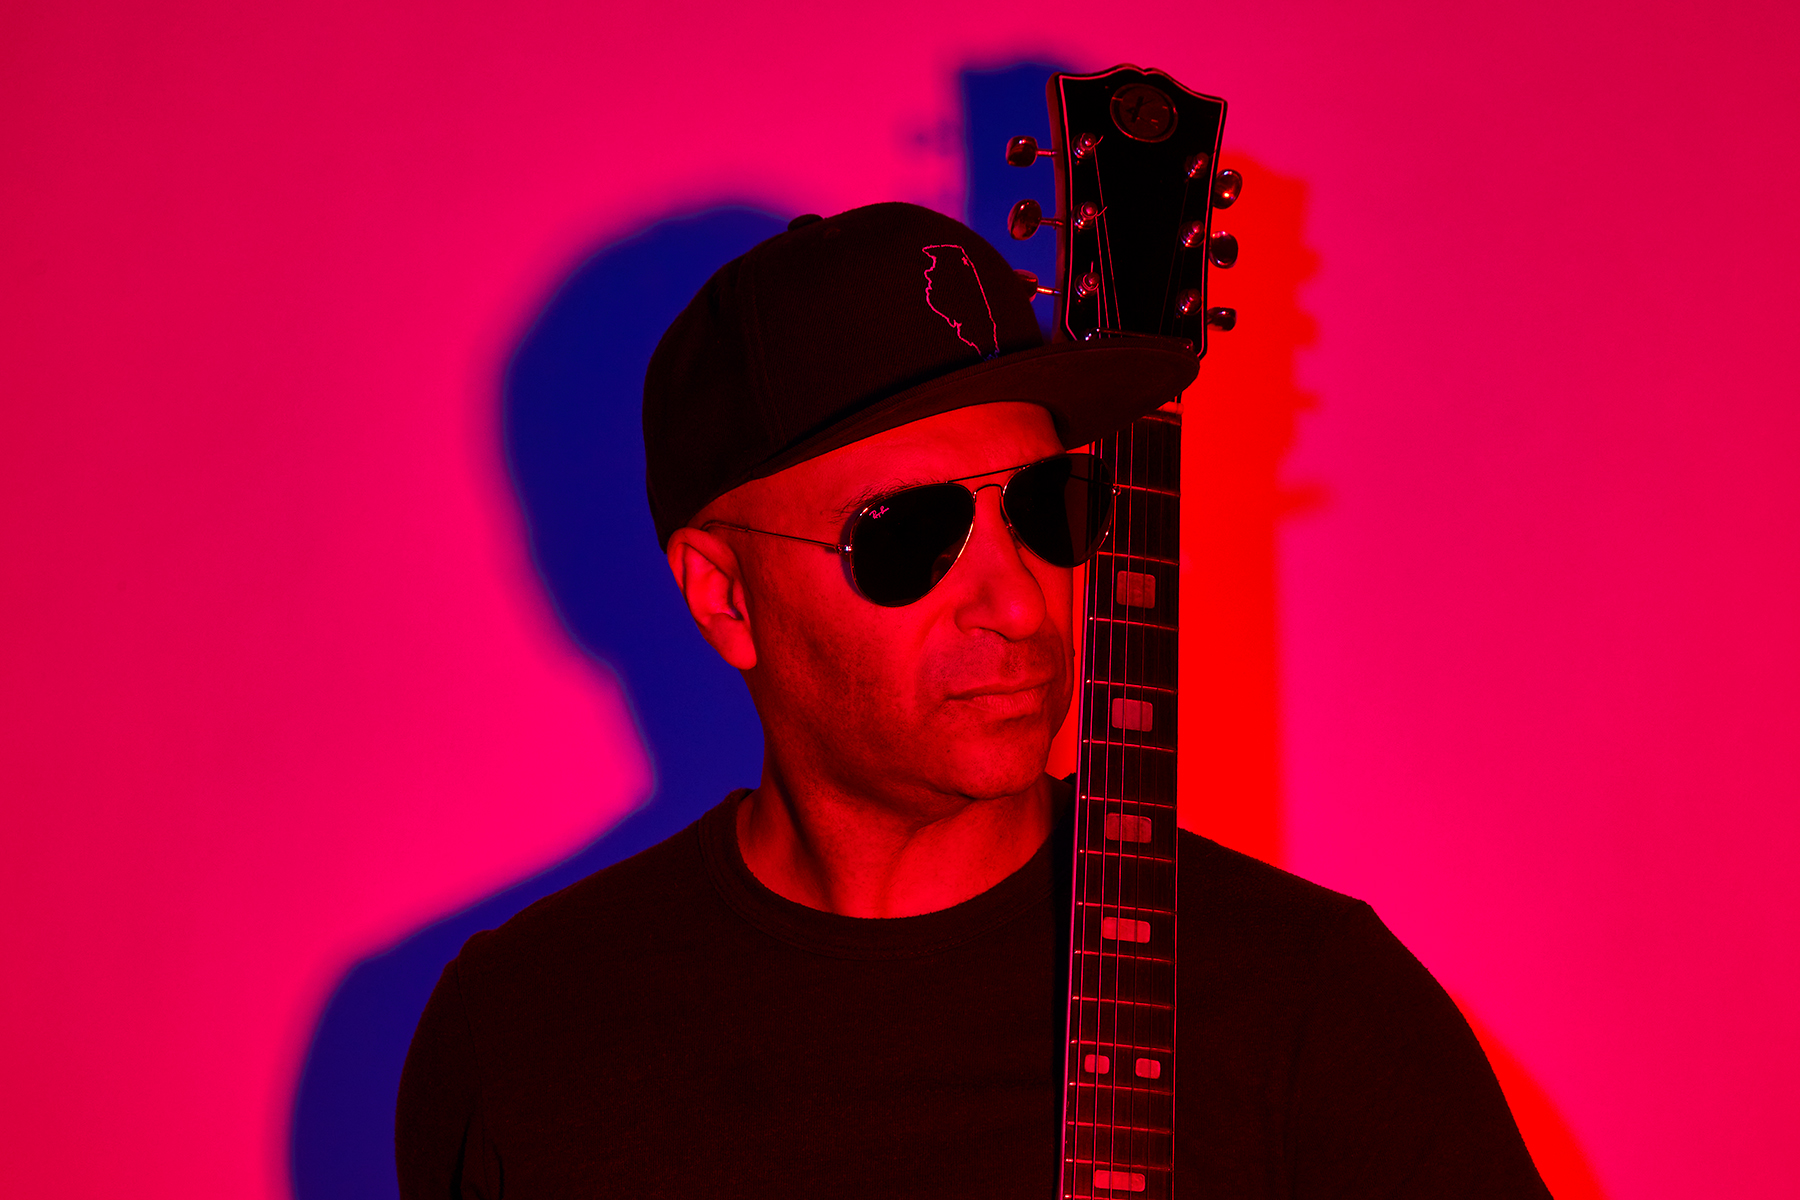 Tom Morello recorded almost all of the guitars on his upcoming album using his iPhone